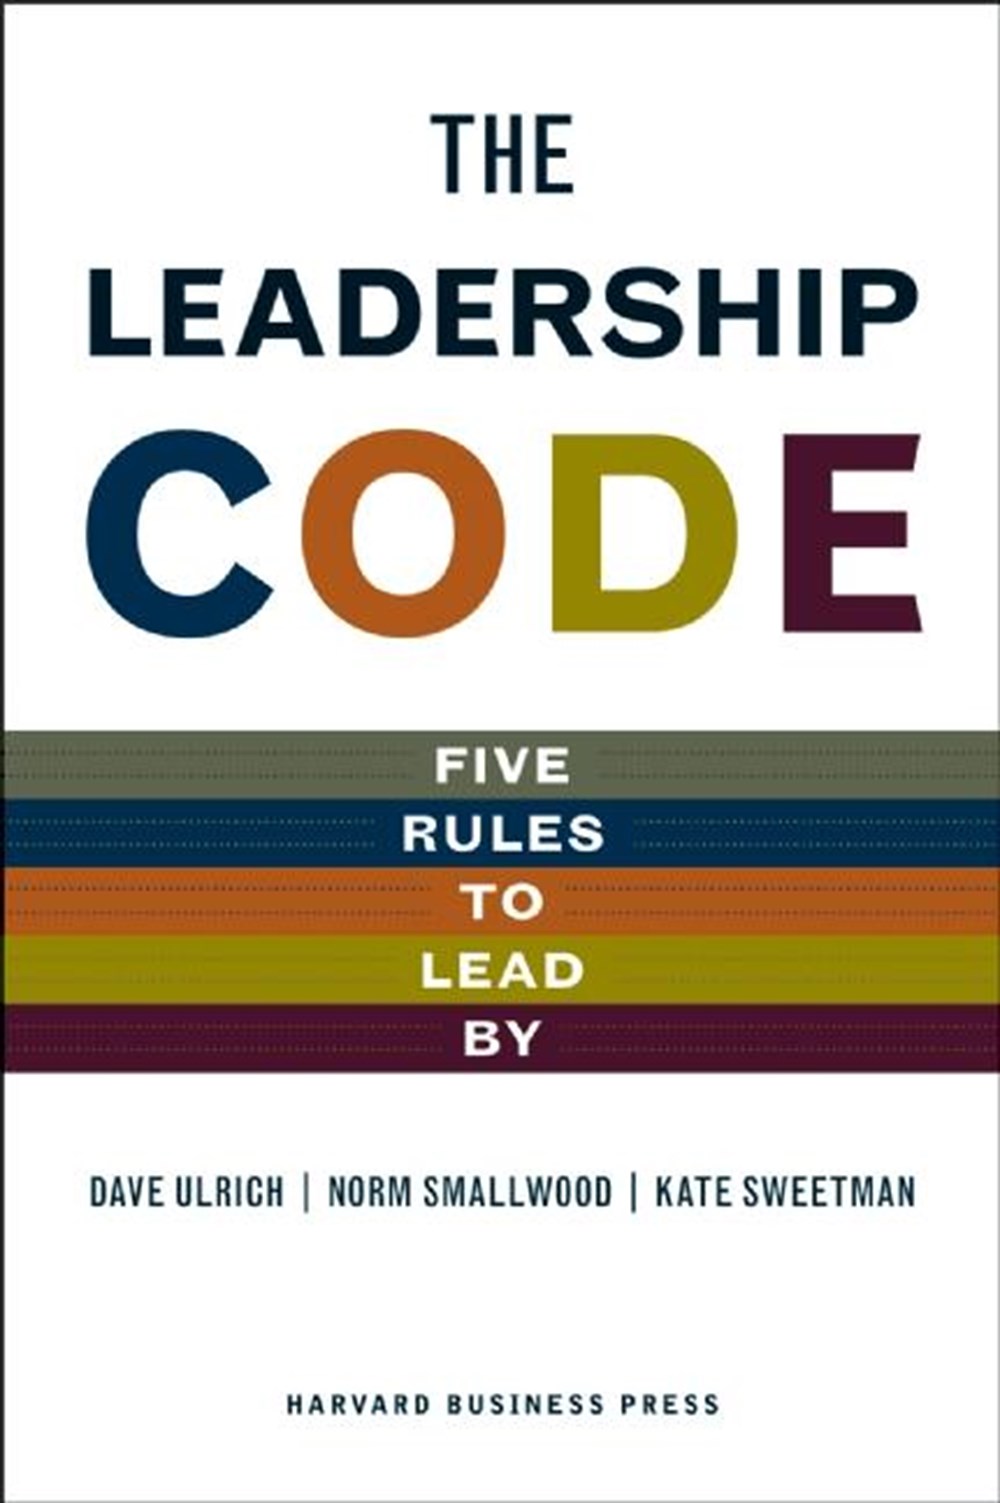 Leadership Code Five Rules to Lead by